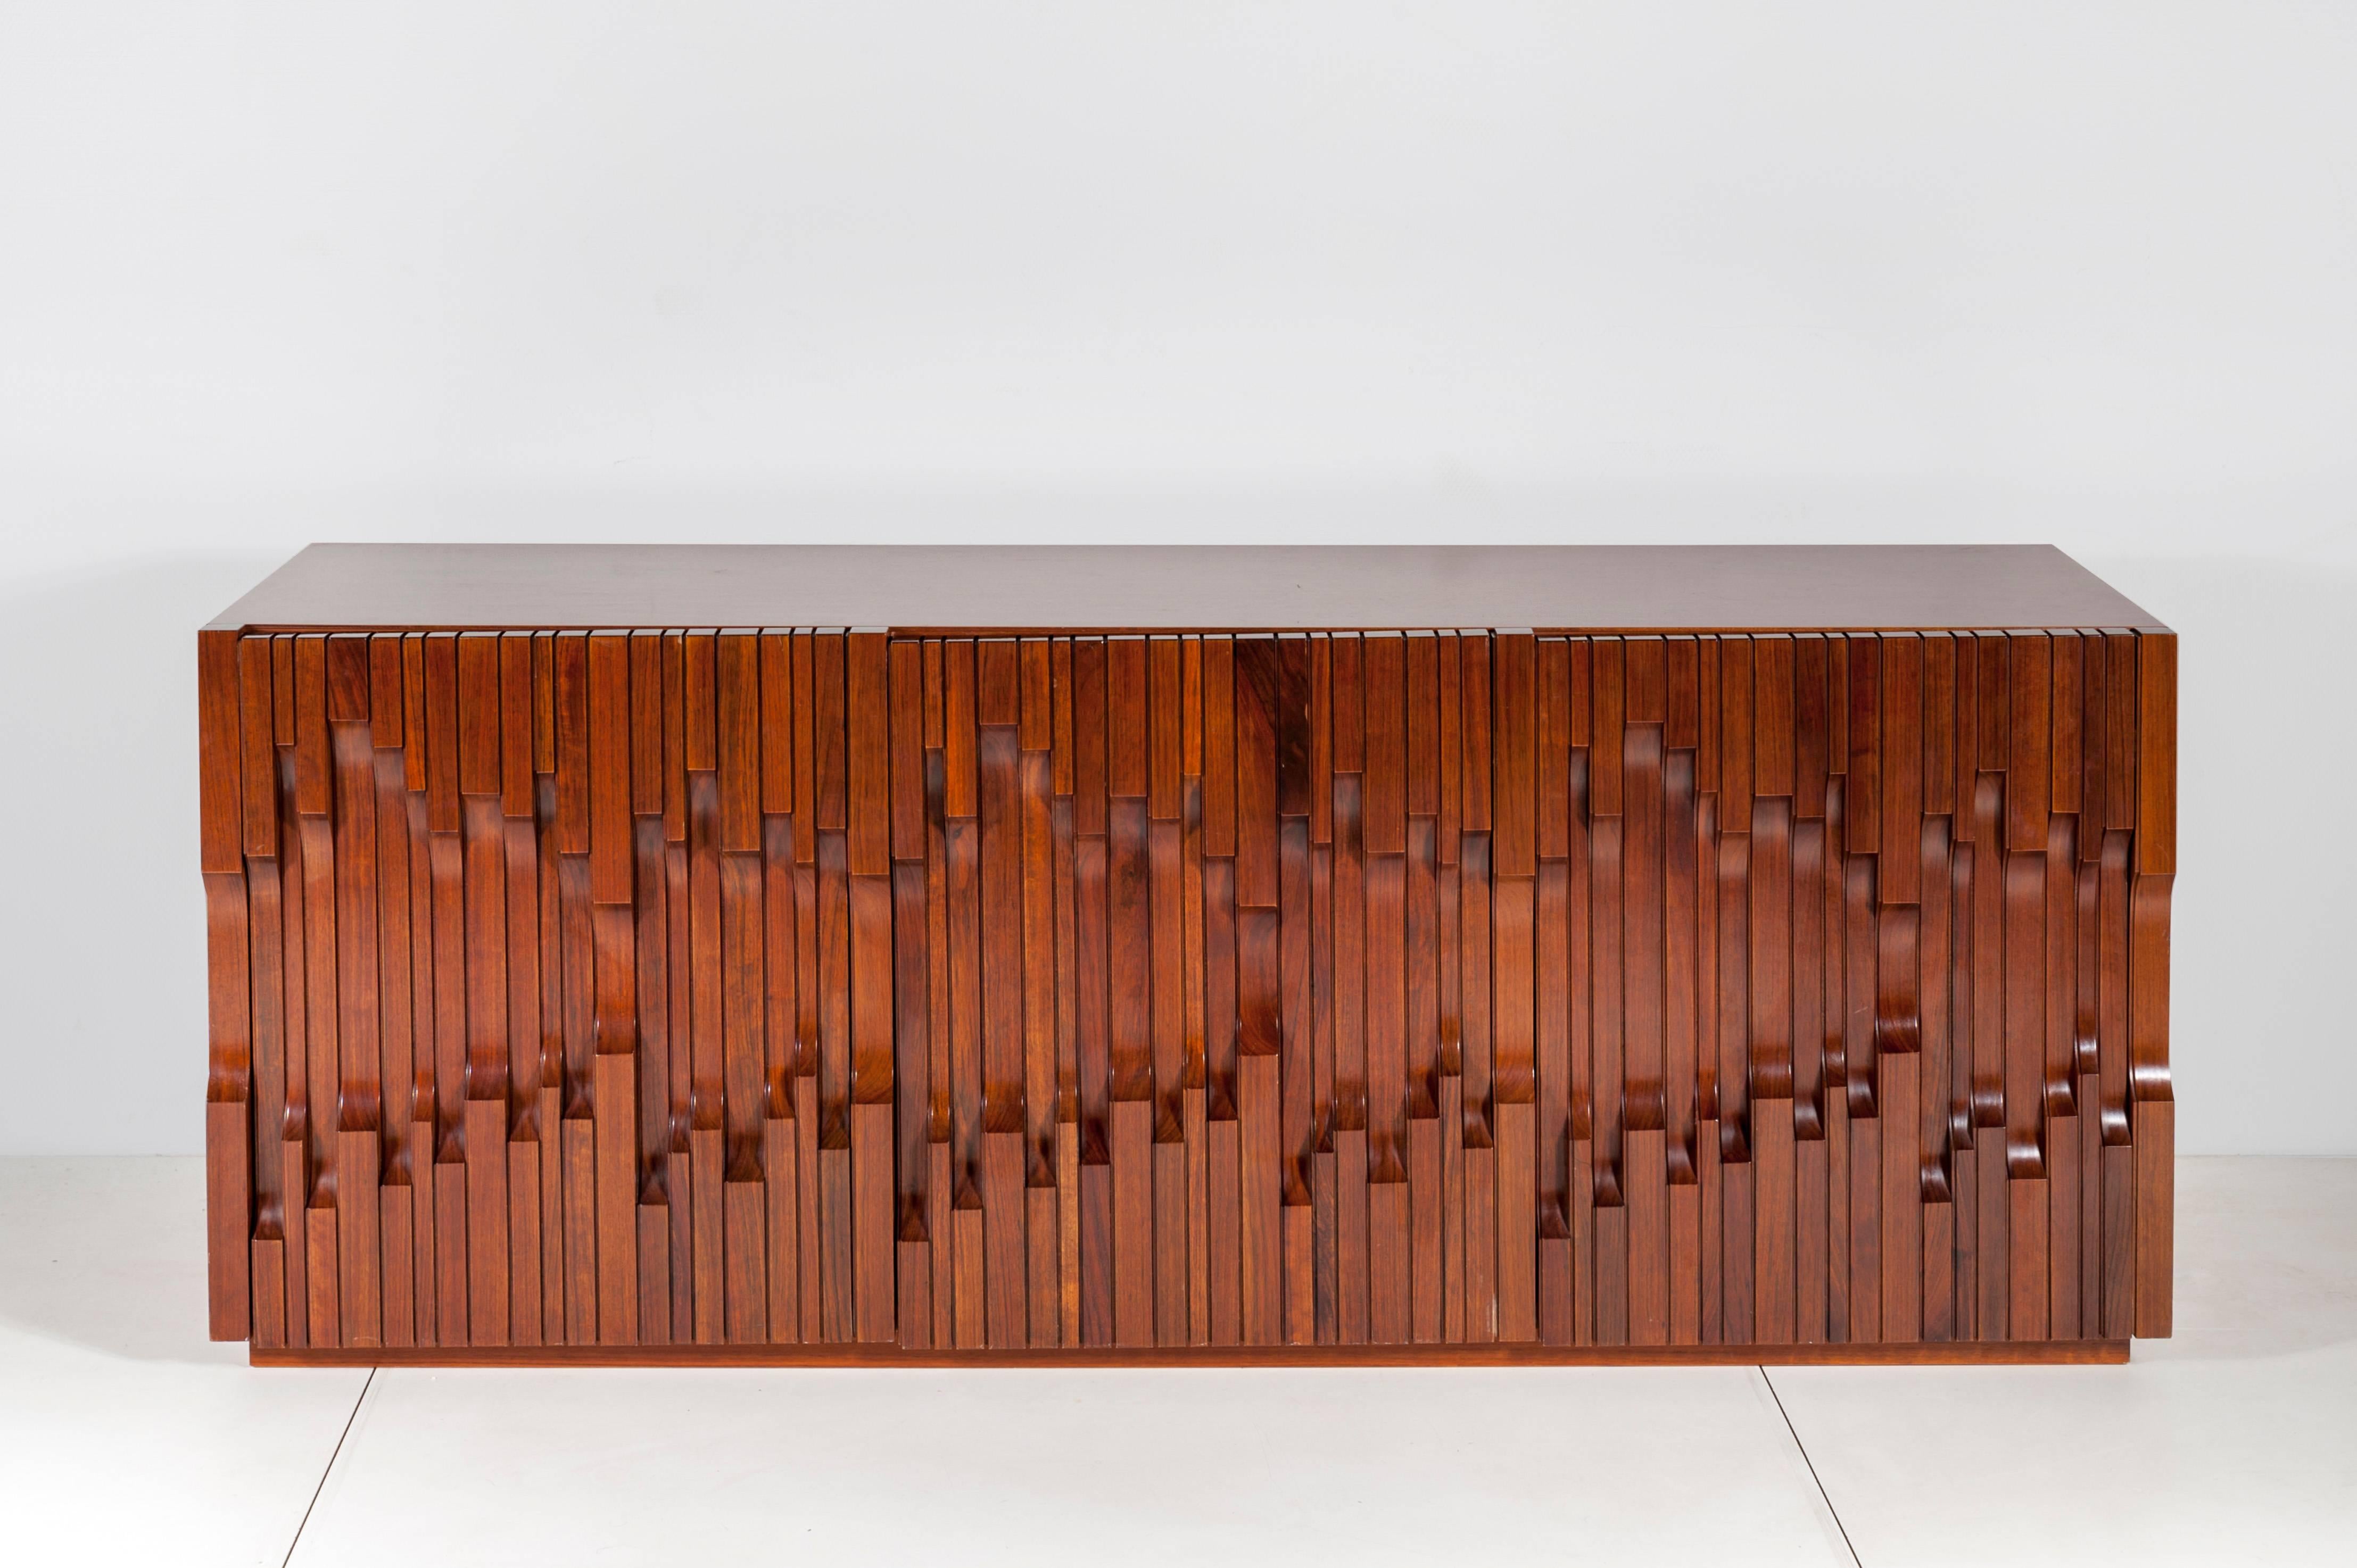 Sideboard three-door african walnut veneer « Norman » model, designed by Luciano Frigerio. Shelf and drawer system inside. Manufactured in Desio, Italy, circa 1972, signed on the side.
Luciano Frigerio (1929-1999) was the son of a family of healers